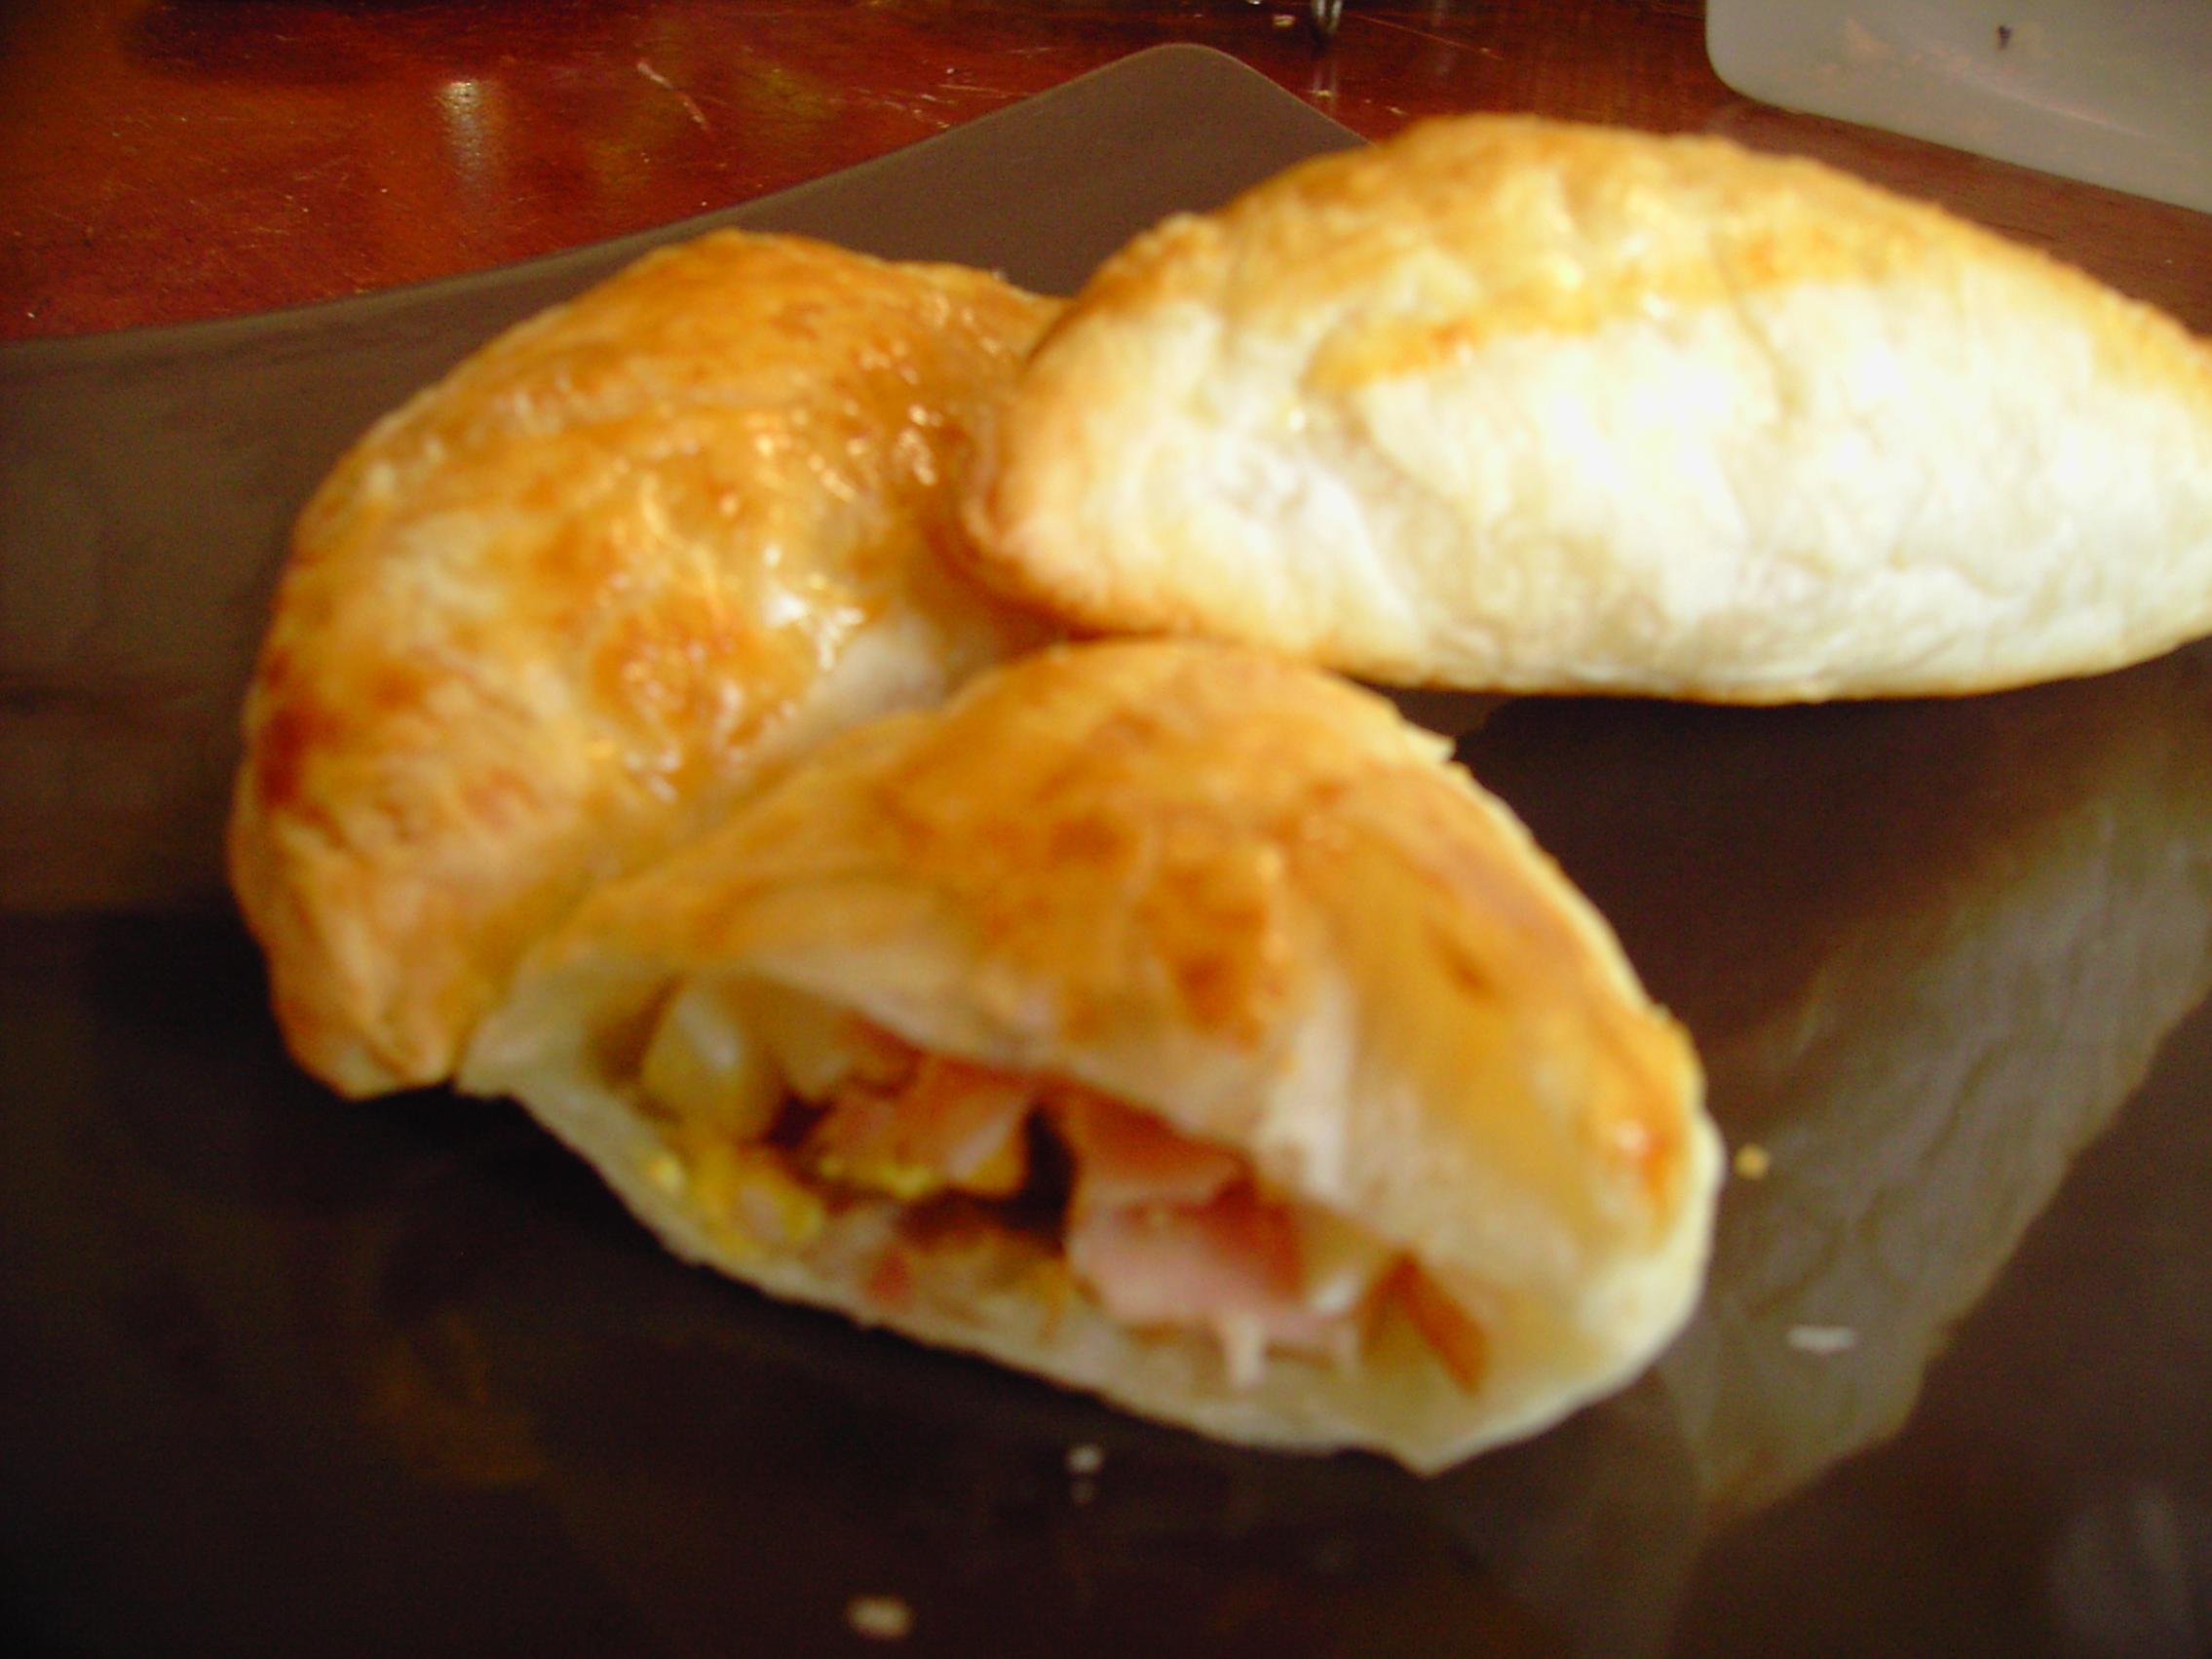  These empanadas are perfect for a quick and easy snack or meal.